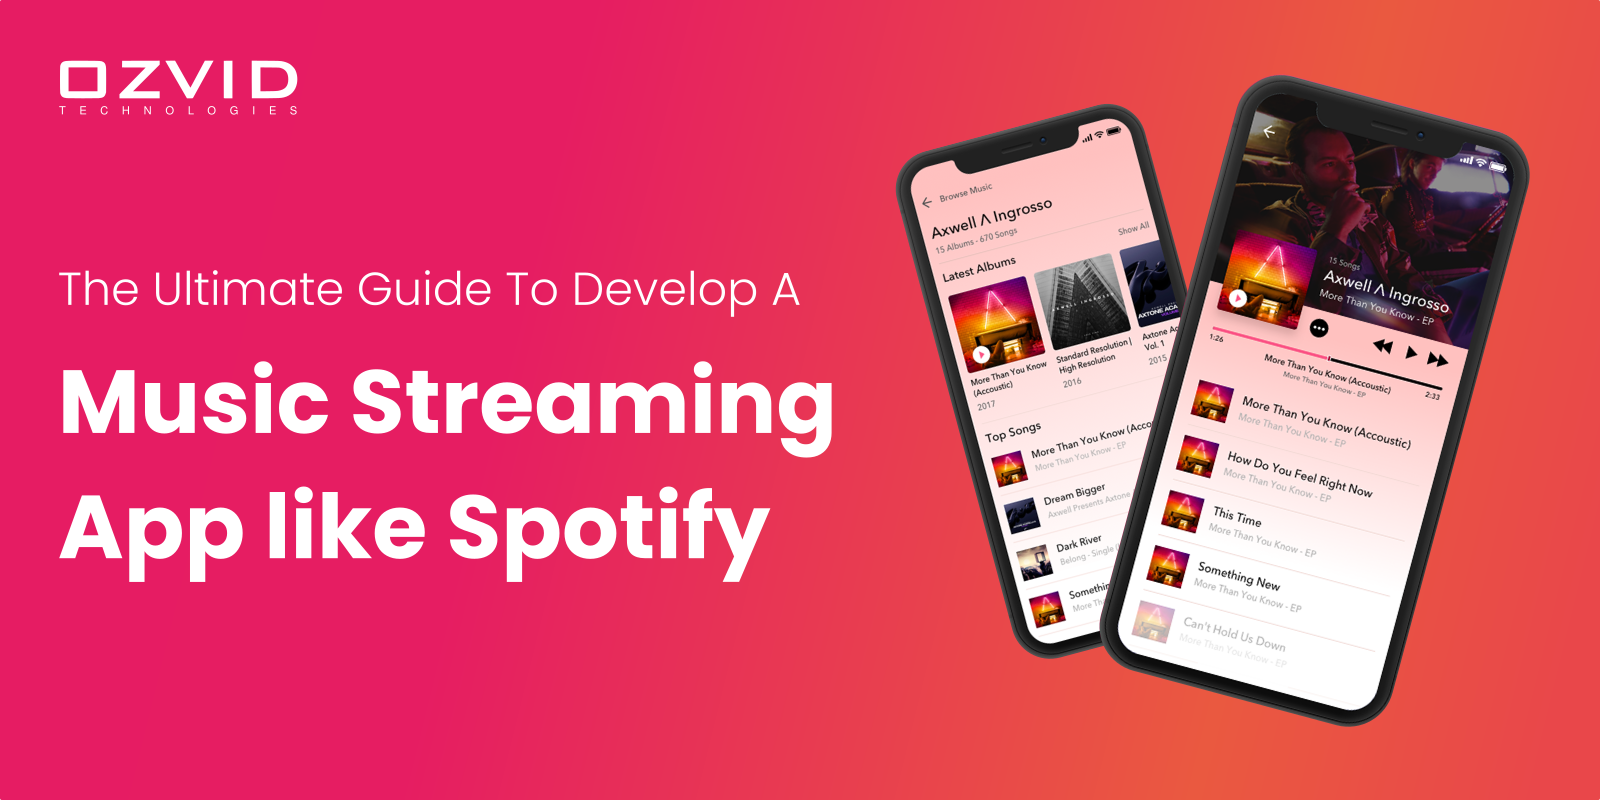 The Ultimate Guide To Develop A Music Streaming App like Spotify